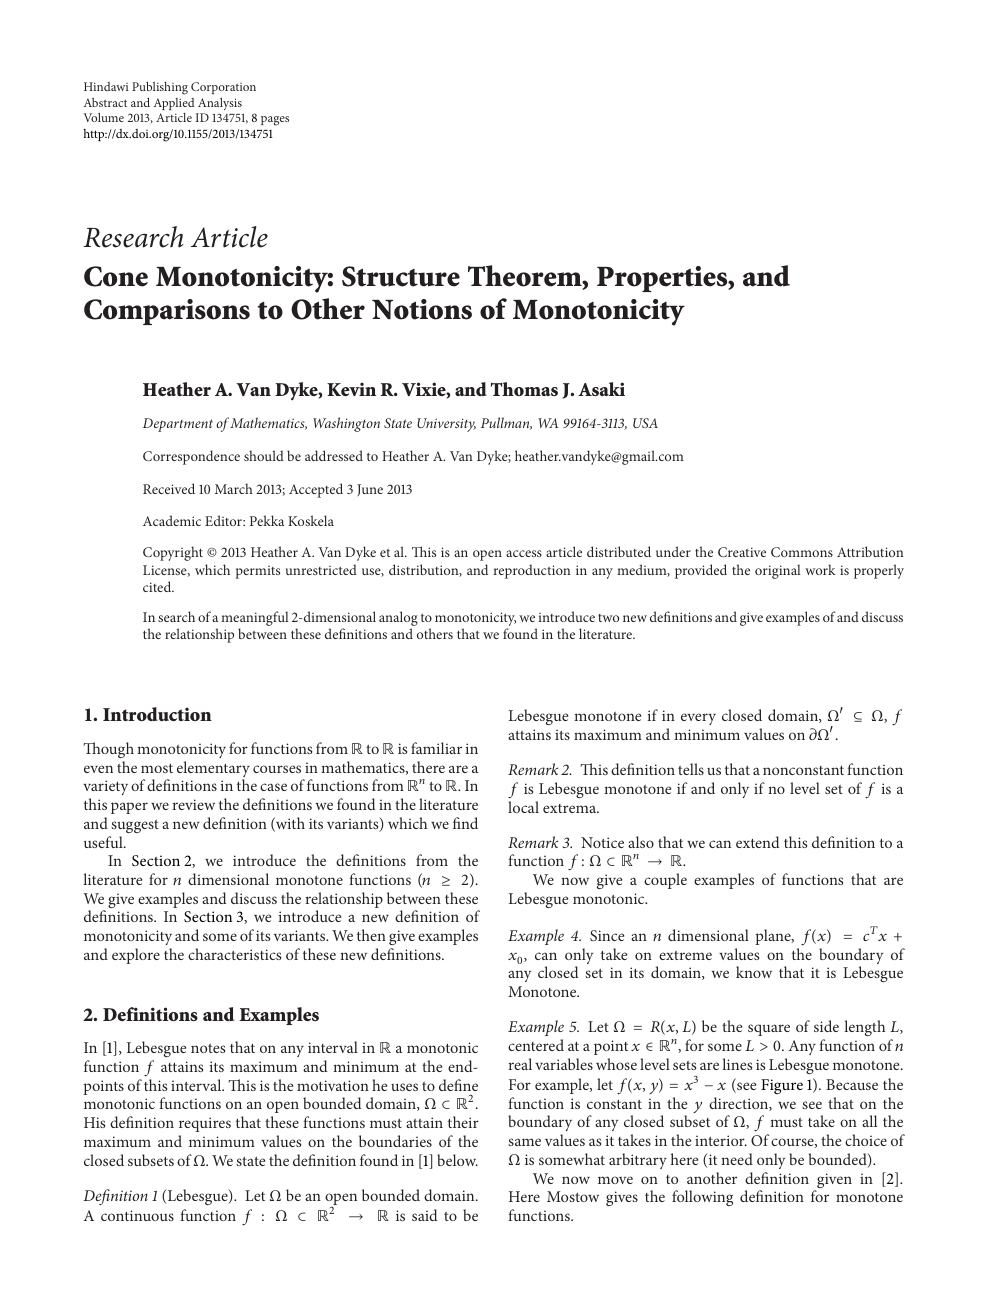 Cone Monotonicity Structure Theorem Properties And Comparisons To Other Notions Of Monotonicity Topic Of Research Paper In Mathematics Download Scholarly Article Pdf And Read For Free On Cyberleninka Open Science Hub